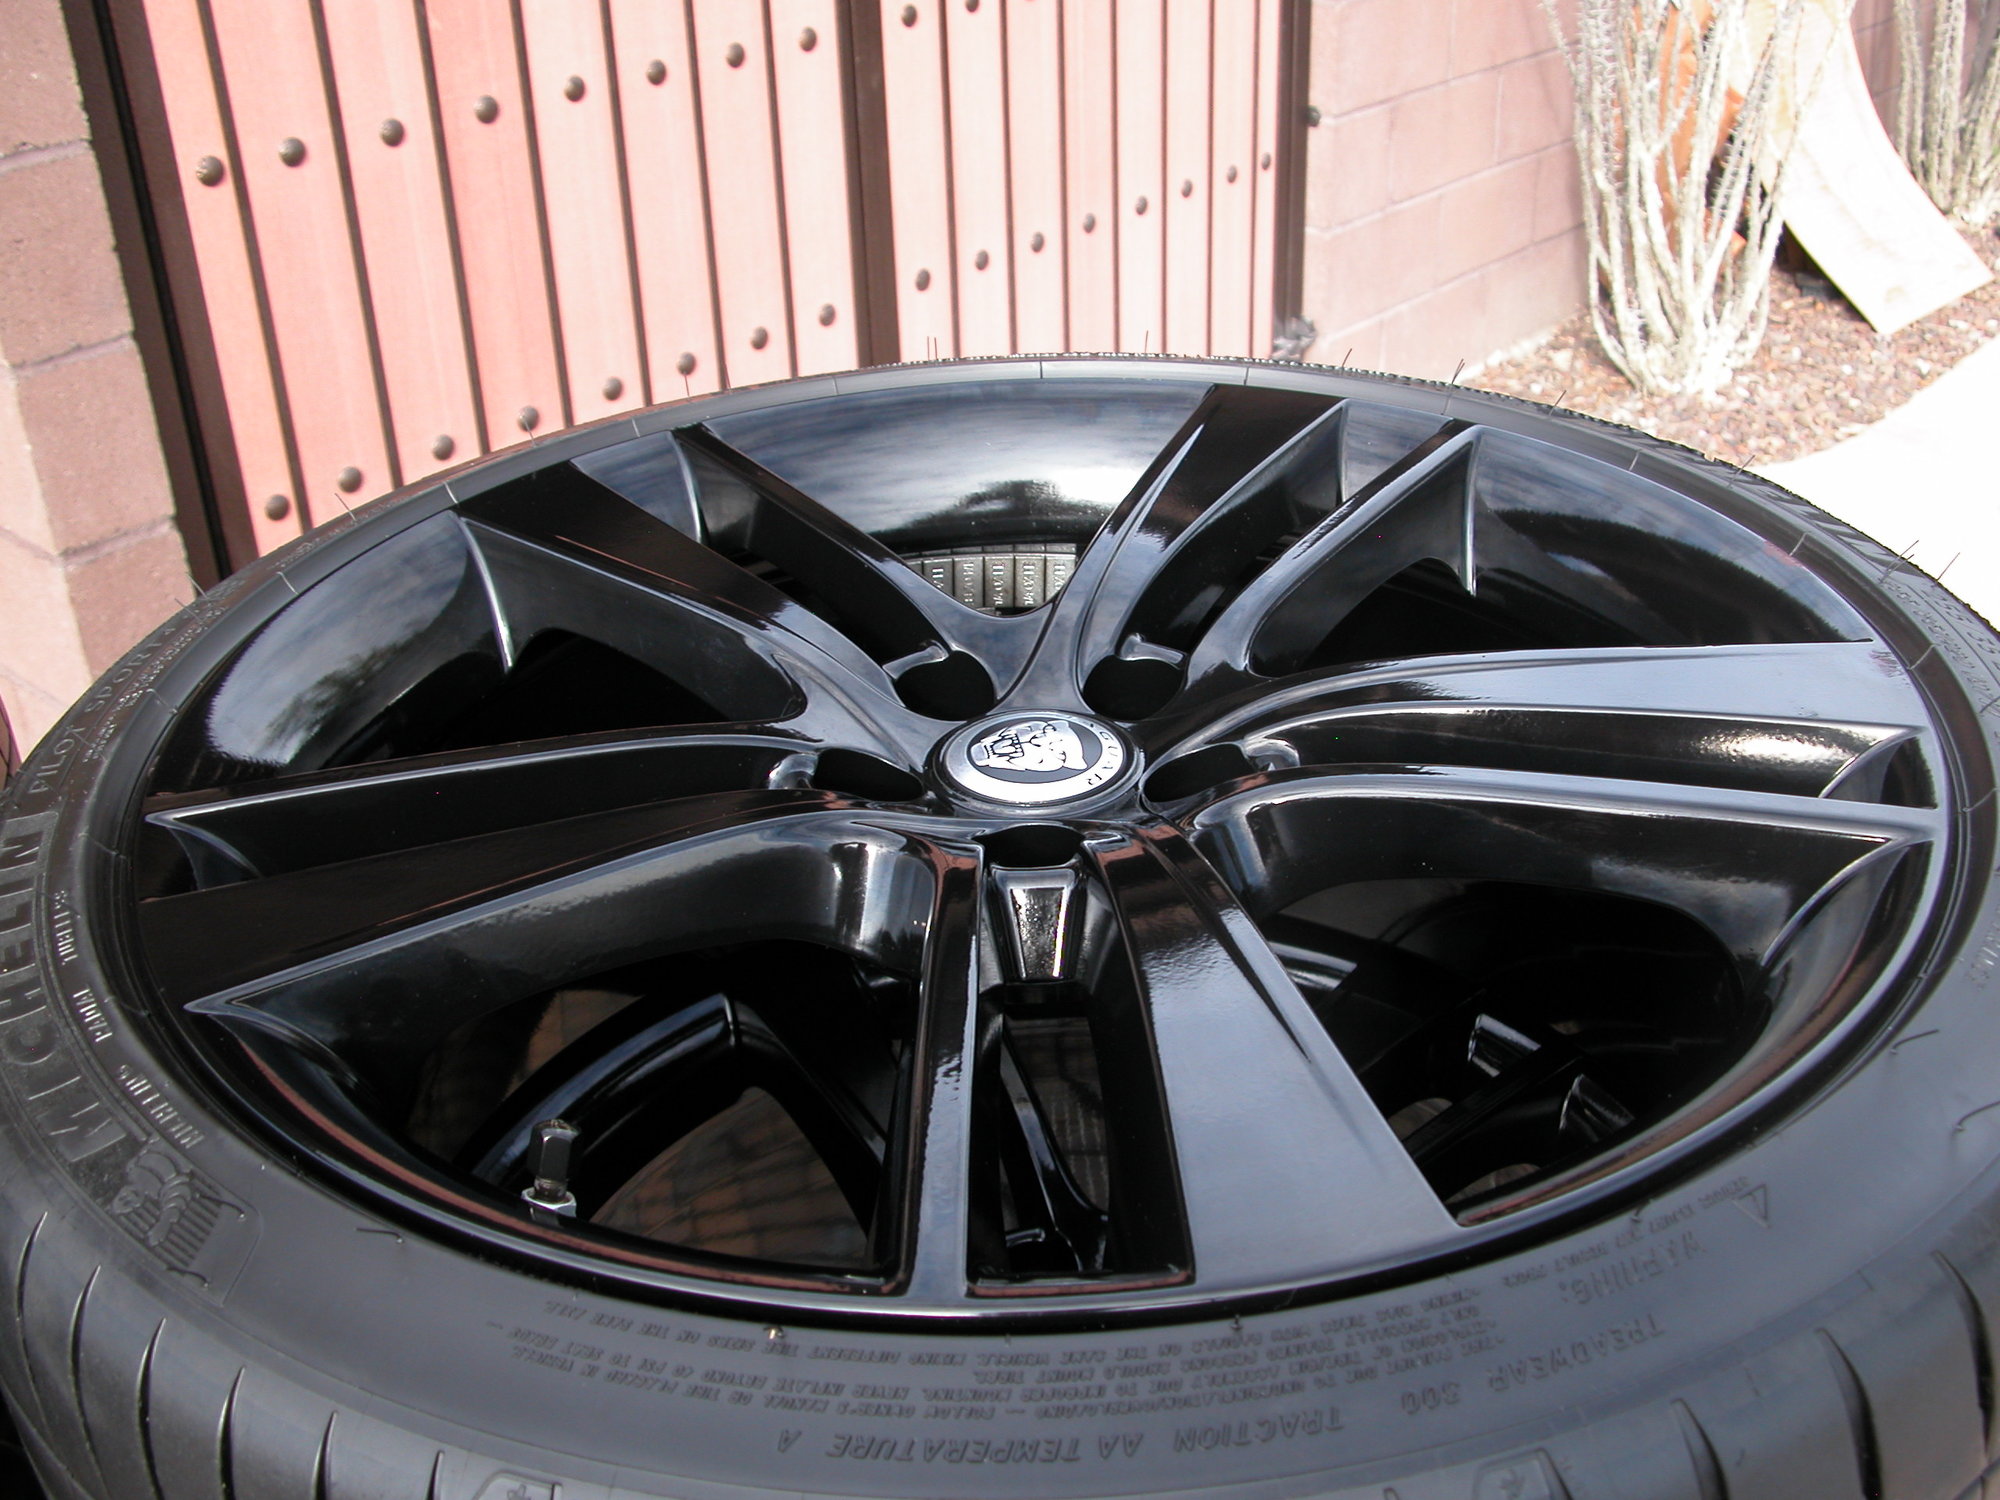 Wheels and Tires/Axles - Jaguar OEM Black "CYCLONE" Wheels and Michelin sport 4 S  tires 20" staggered Wheels - Used - All Years Jaguar F-Type - Desert Hills, AZ 85086, United States